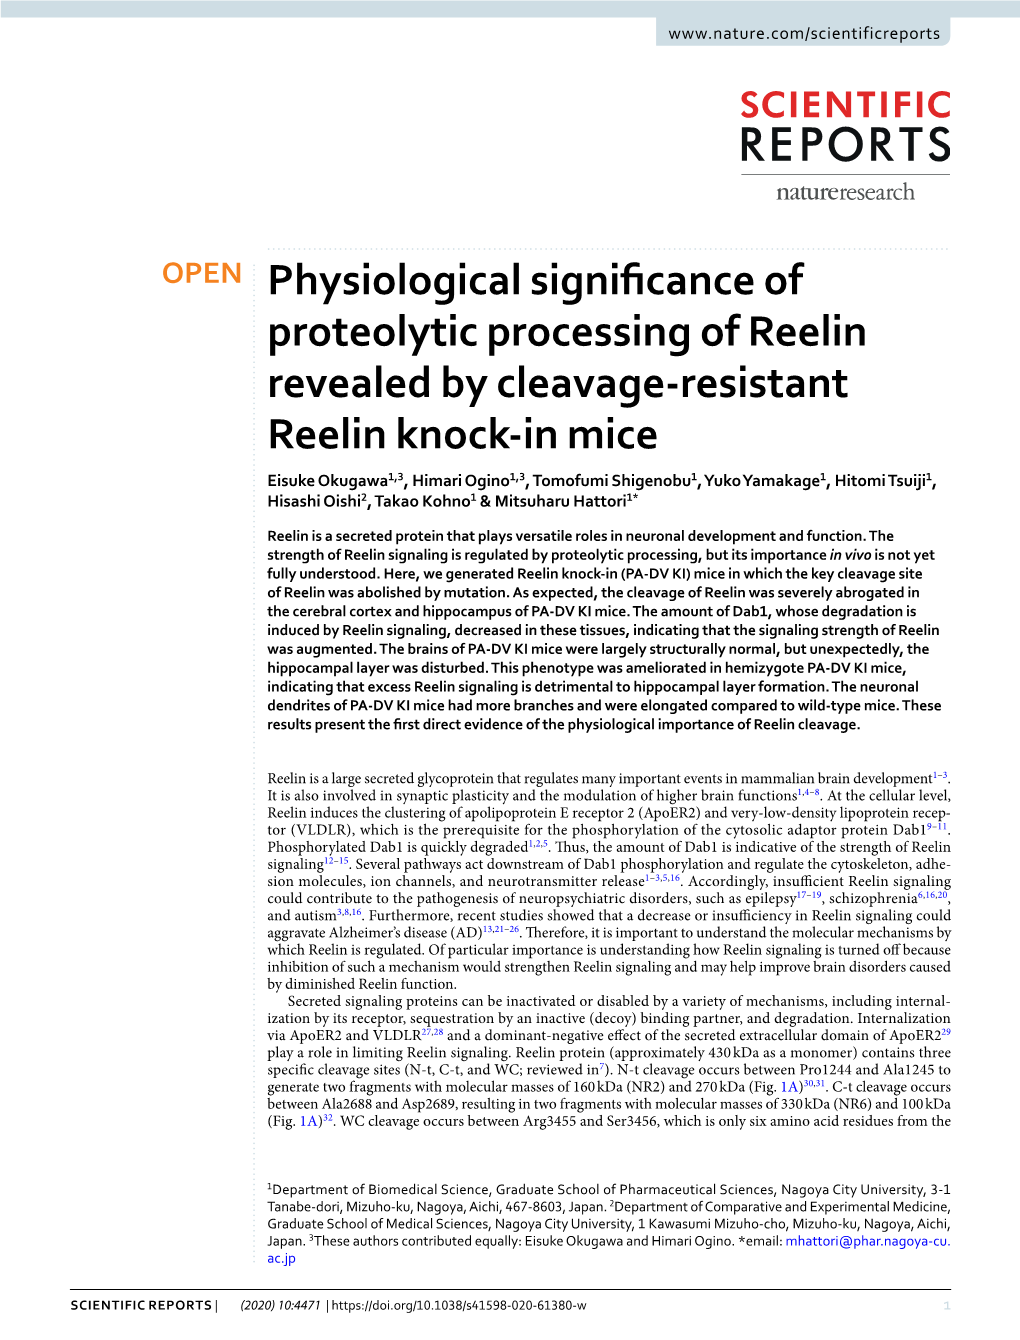 Physiological Significance of Proteolytic Processing of Reelin